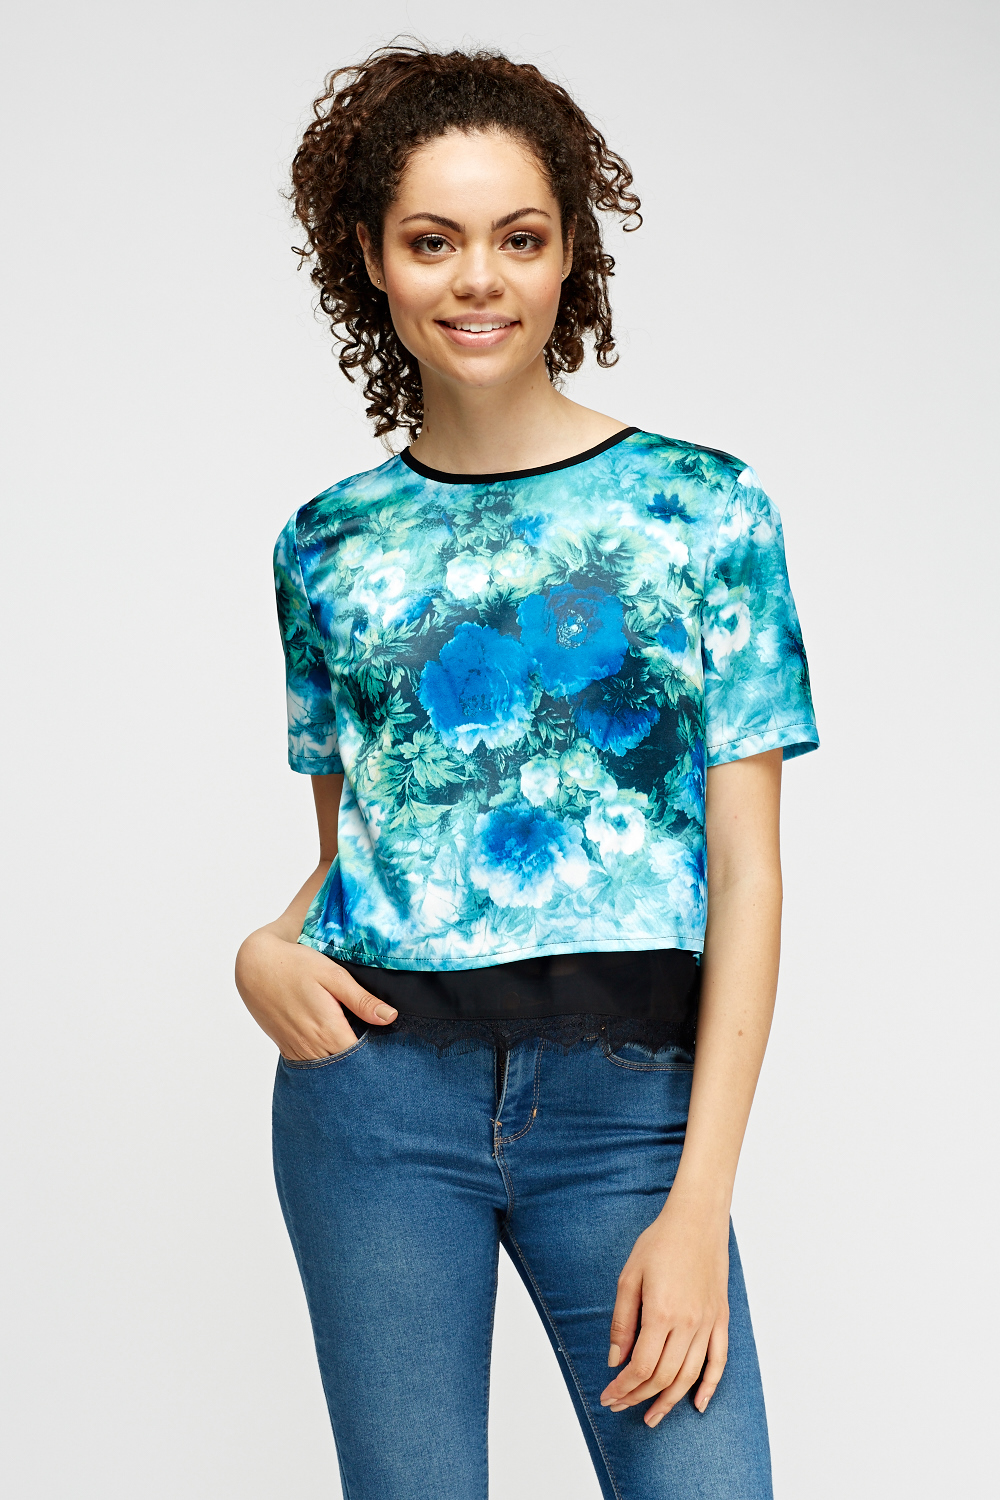 Contrast Printed Overlay Top - Just $3